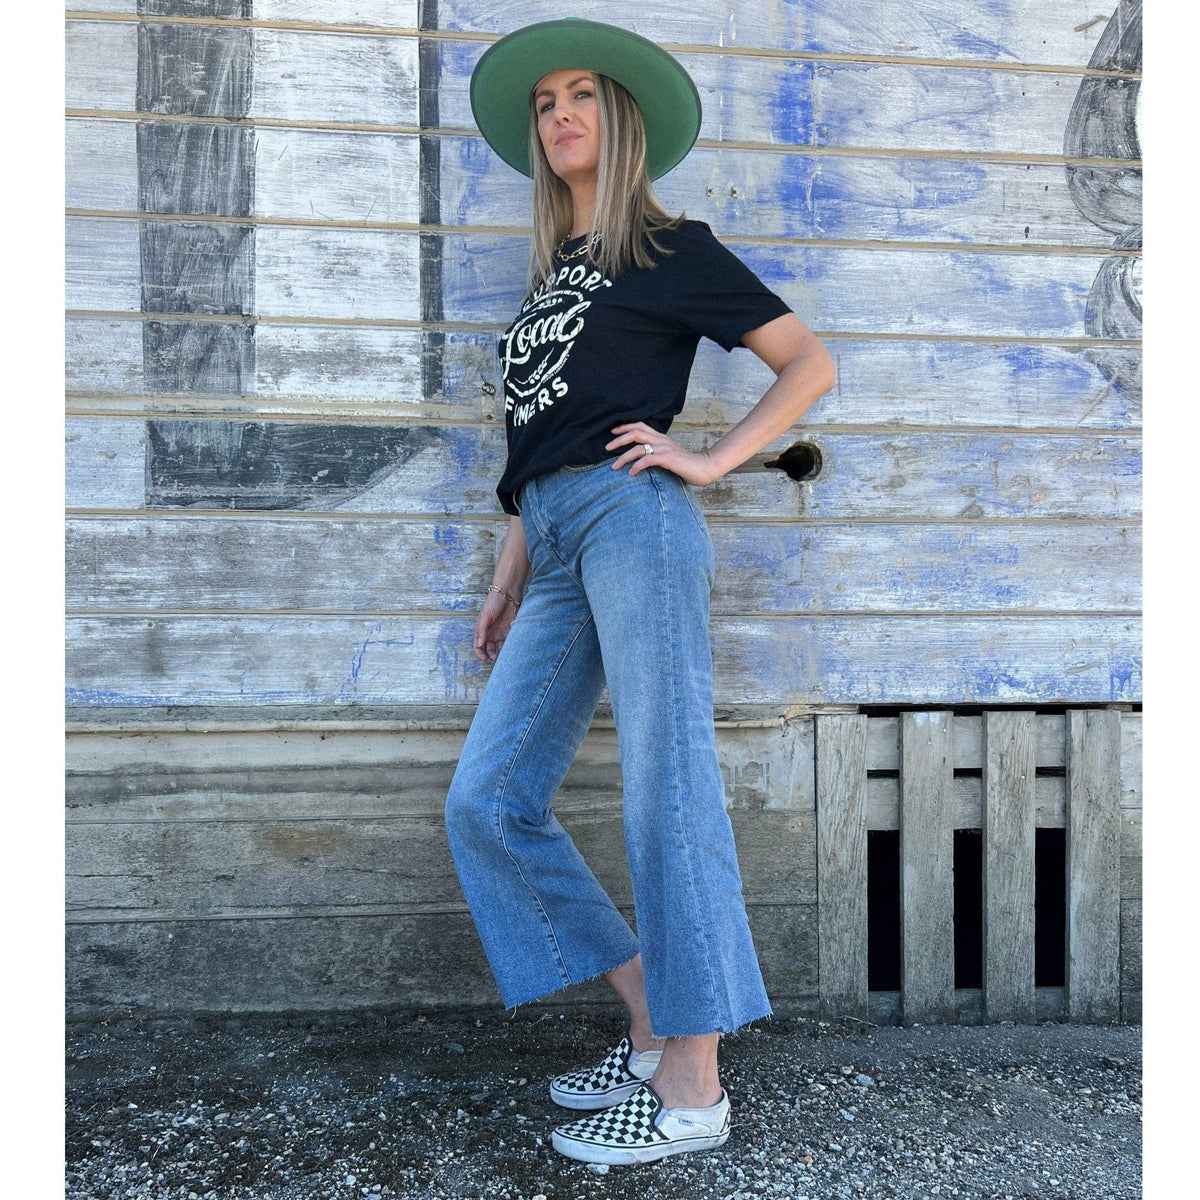 Women's Support Local Farmers graphic Tee Graphic T-shirt TheFringeCultureCollective